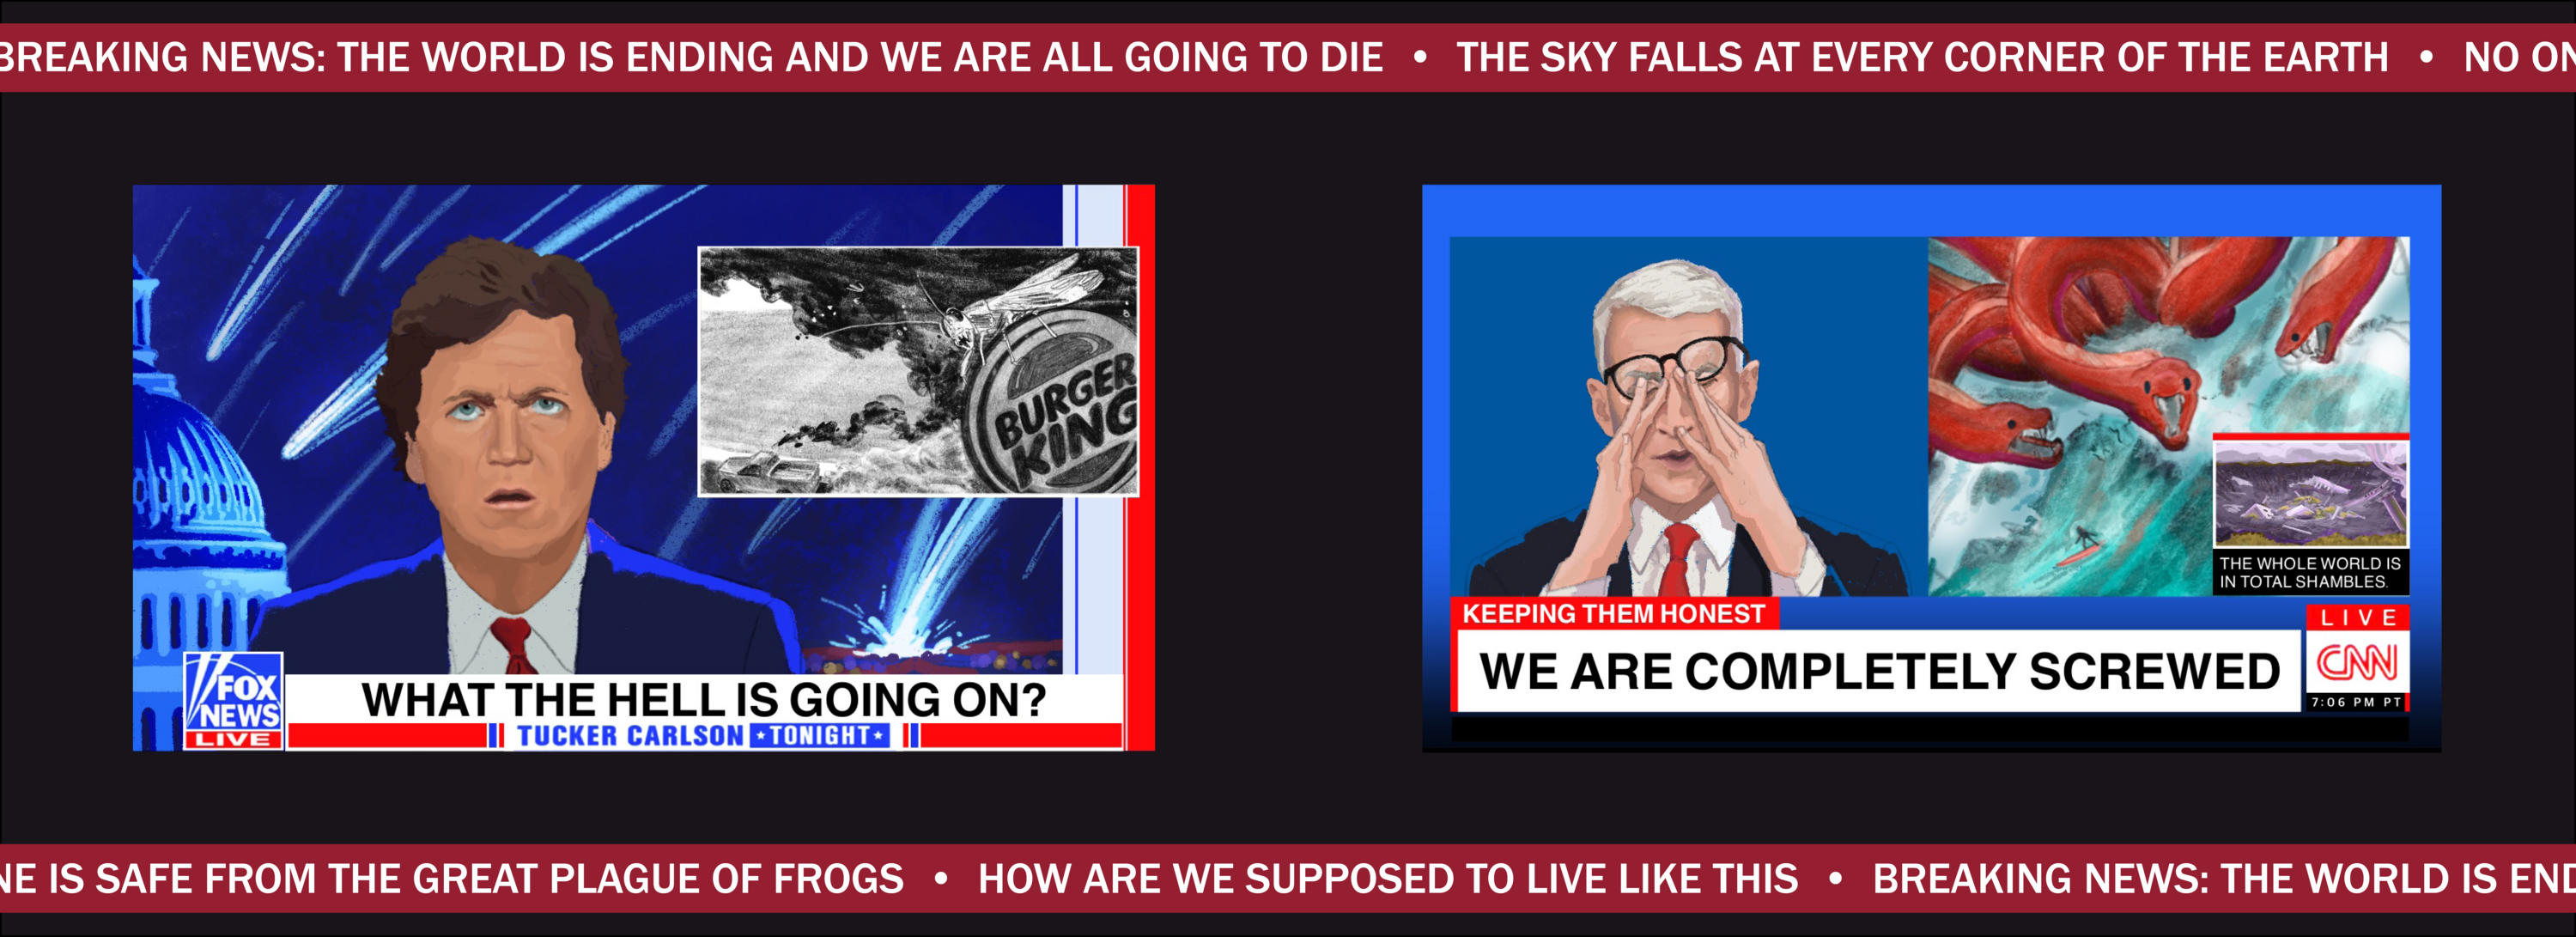 Two newscasters react to the end of the world.